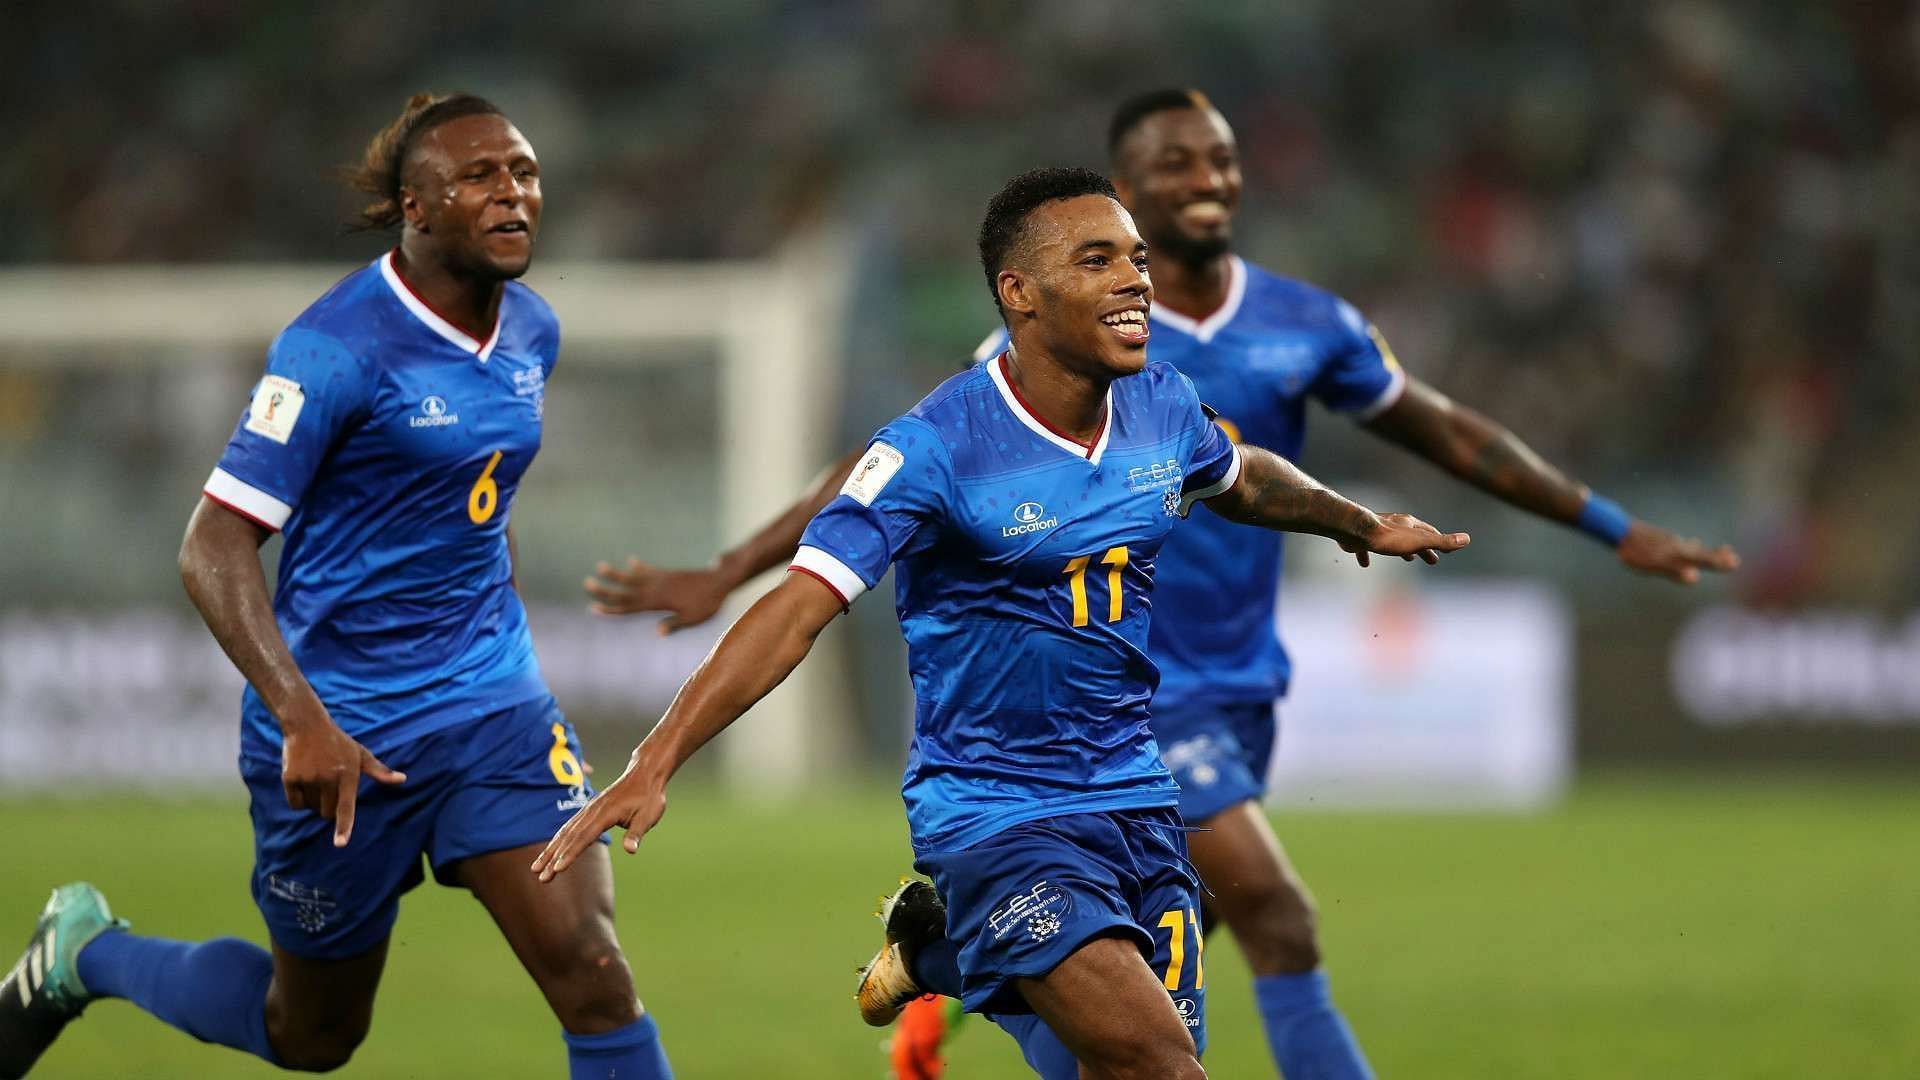 Africa Cup of Nations: Cape Verde - Burkina Faso Bets and Odds for the match on January 13